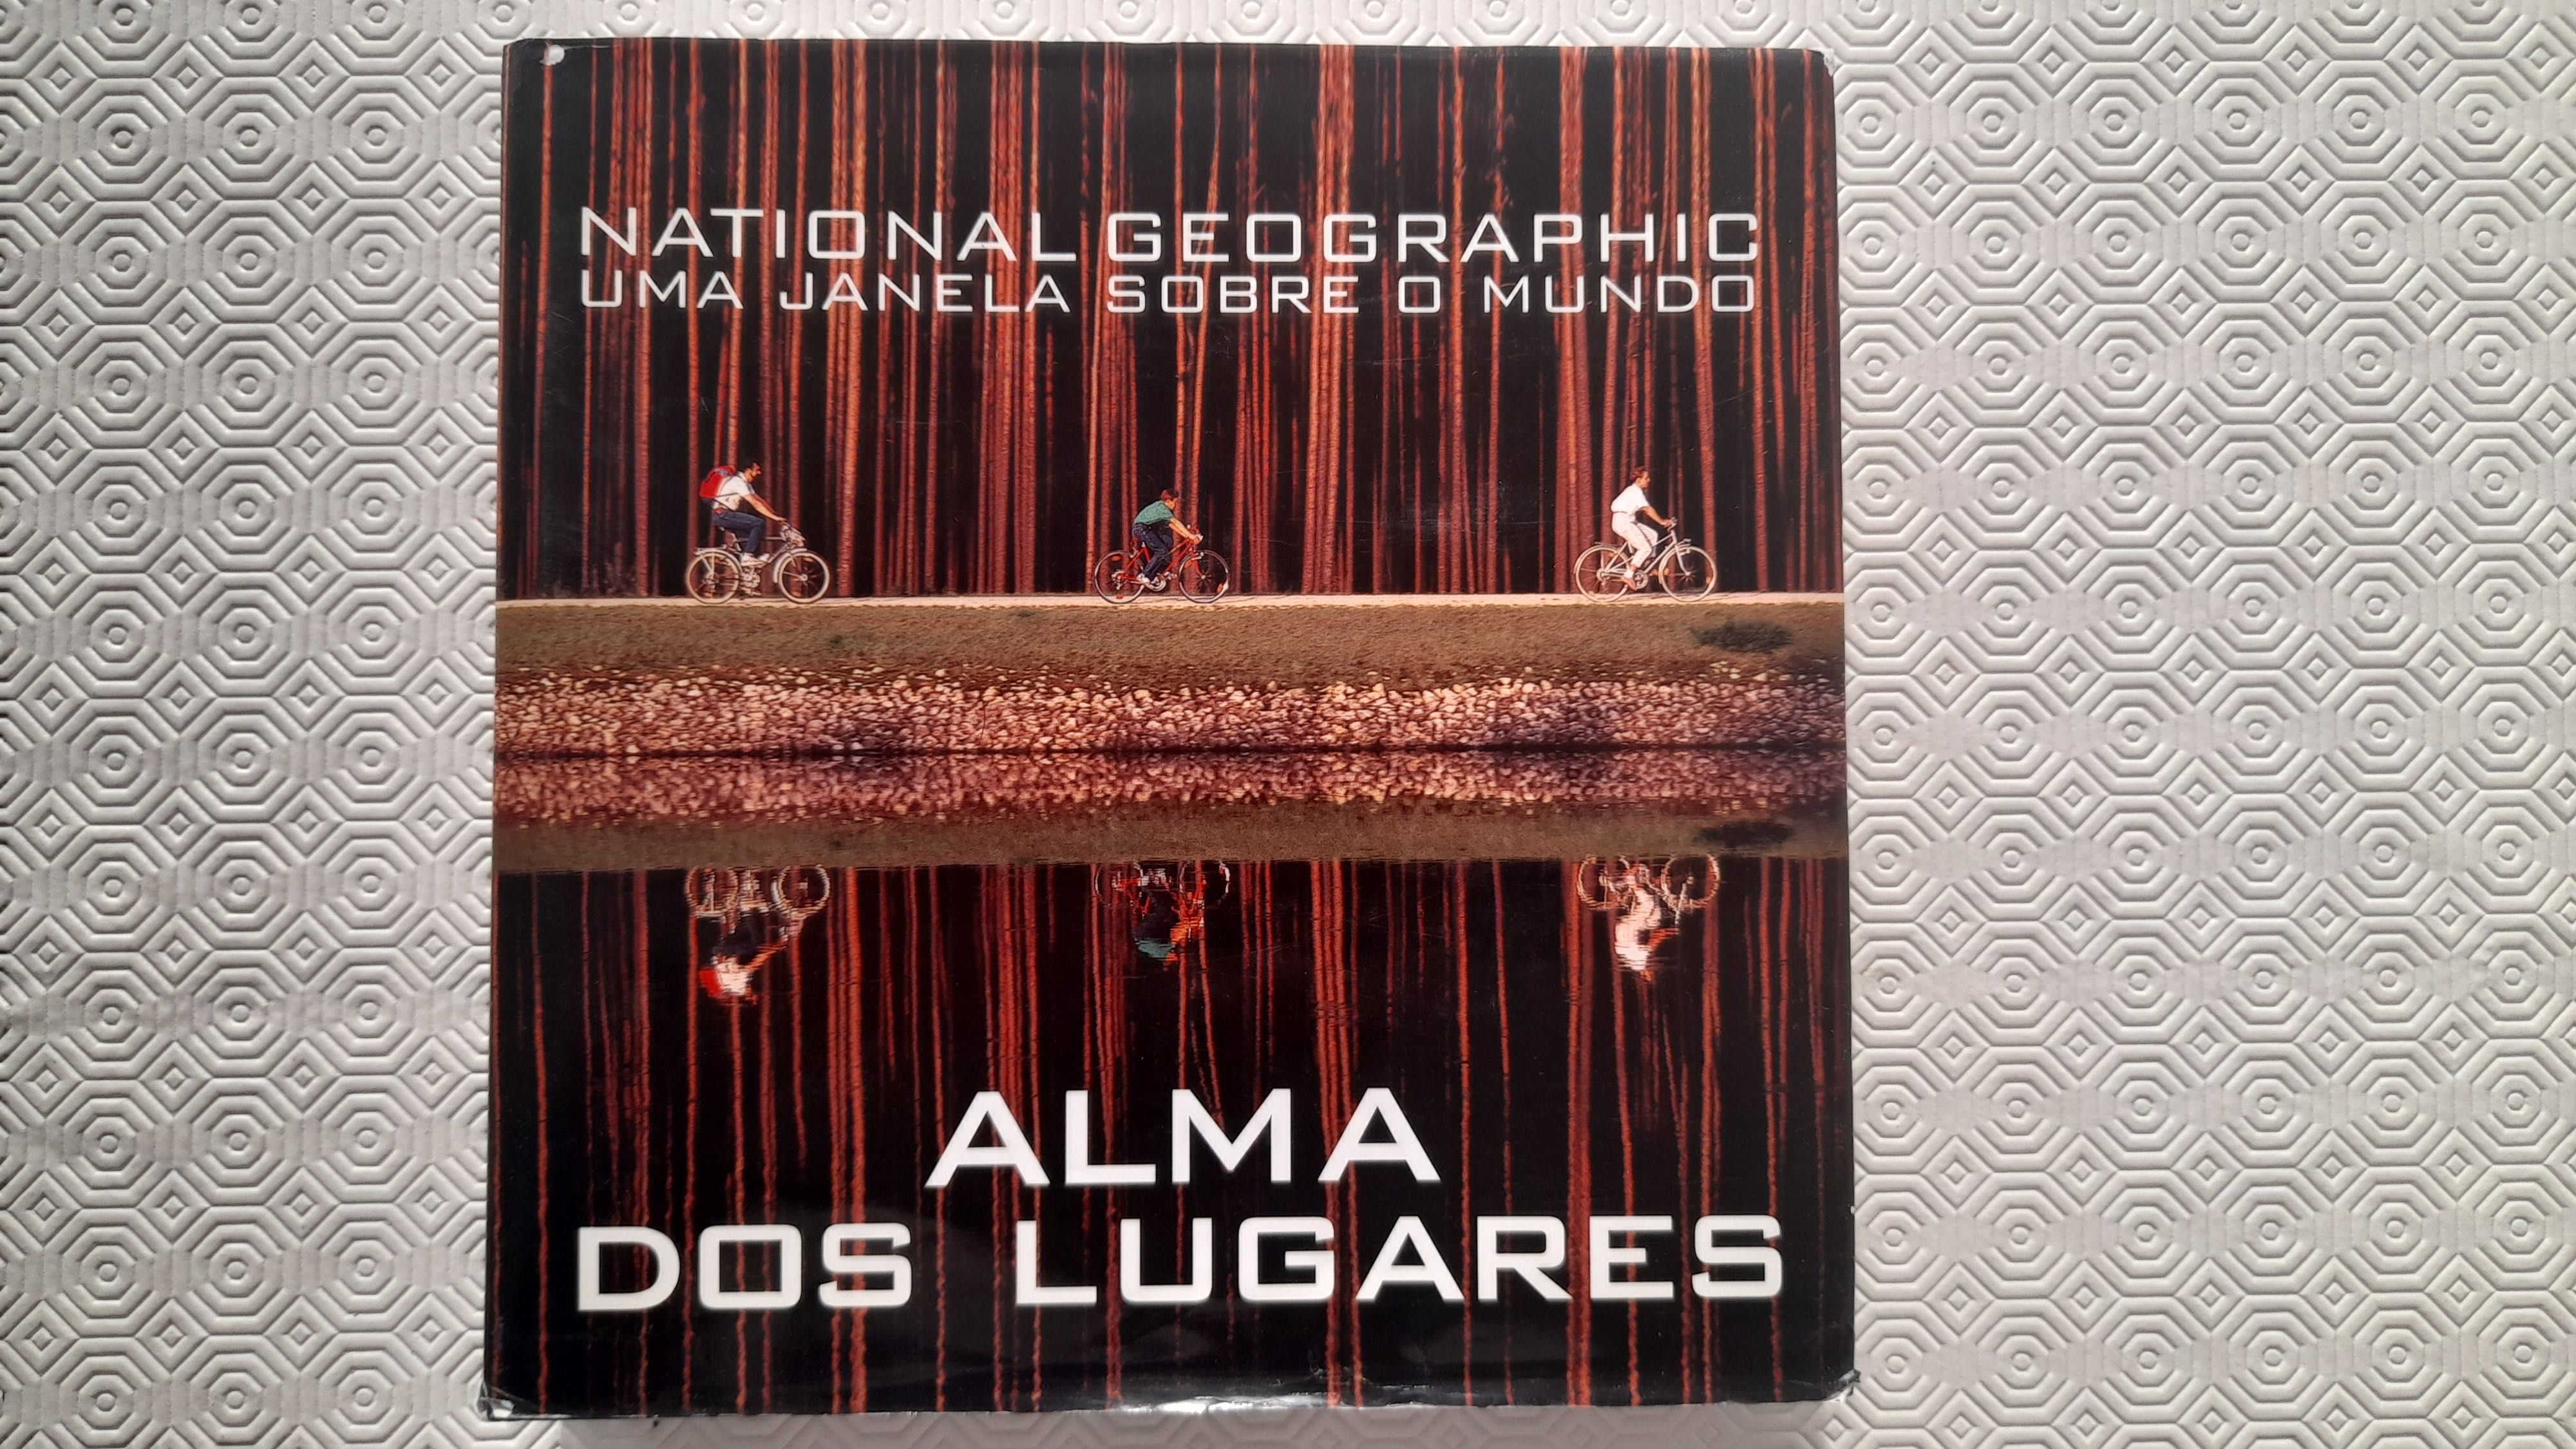 A ALMA DOS LUGARES - National Geographic